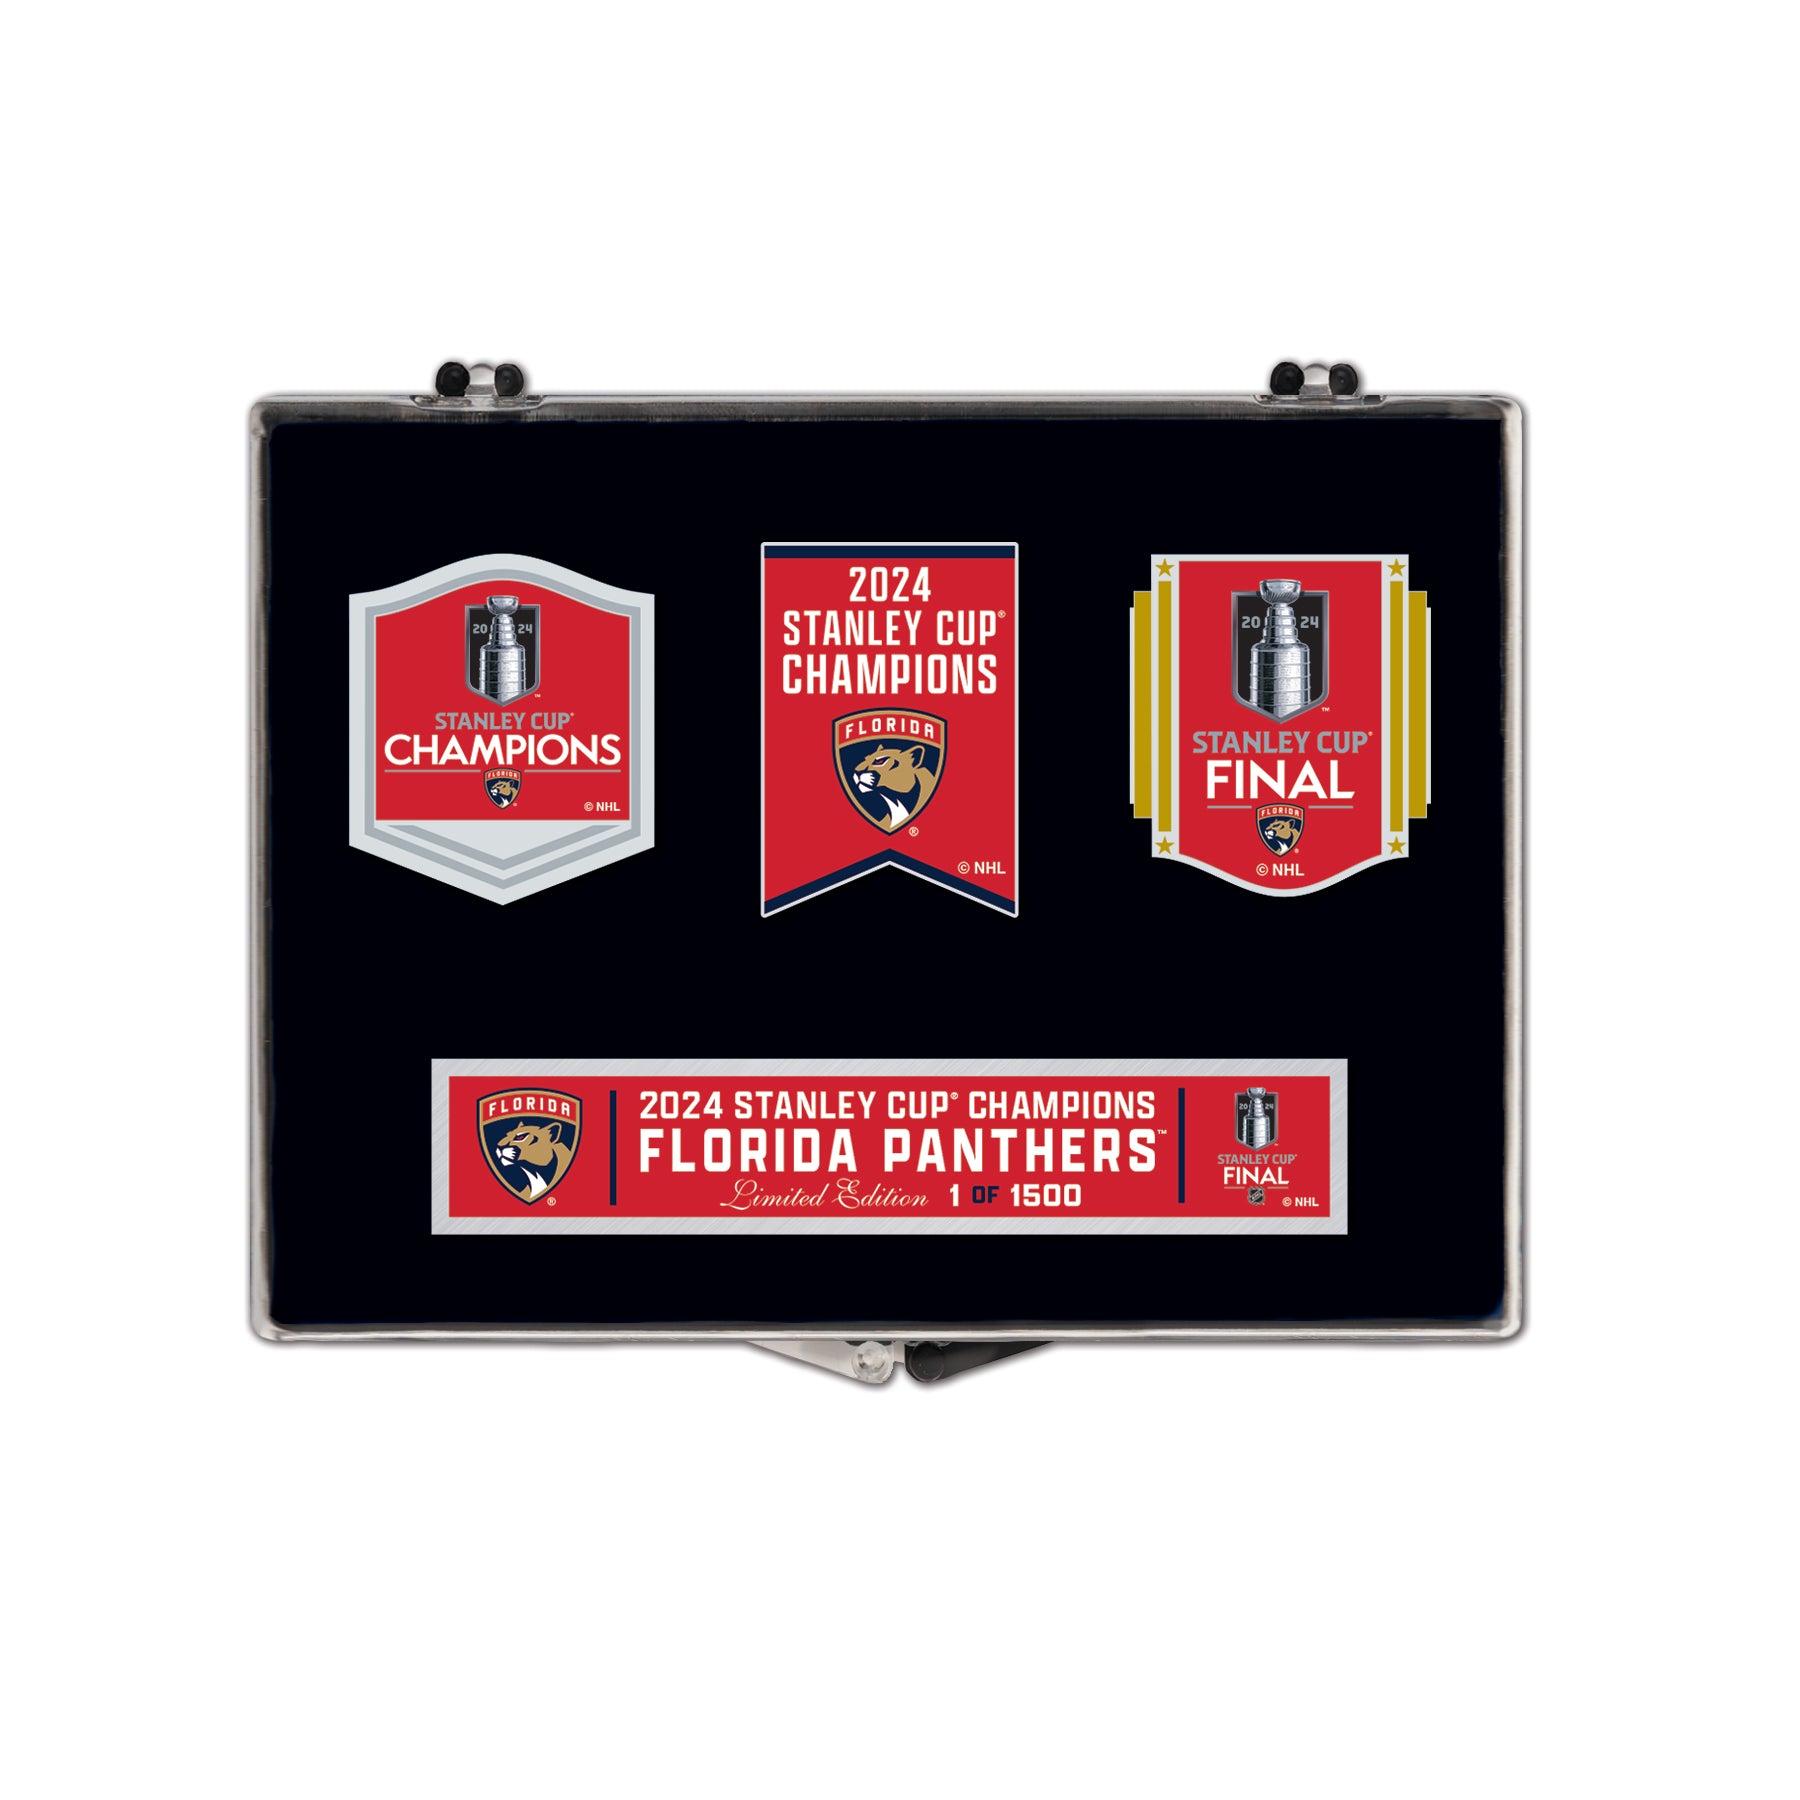 Florida Panthers 2024 Stanley Cup Champions Collector Pin Set - 3 Piece